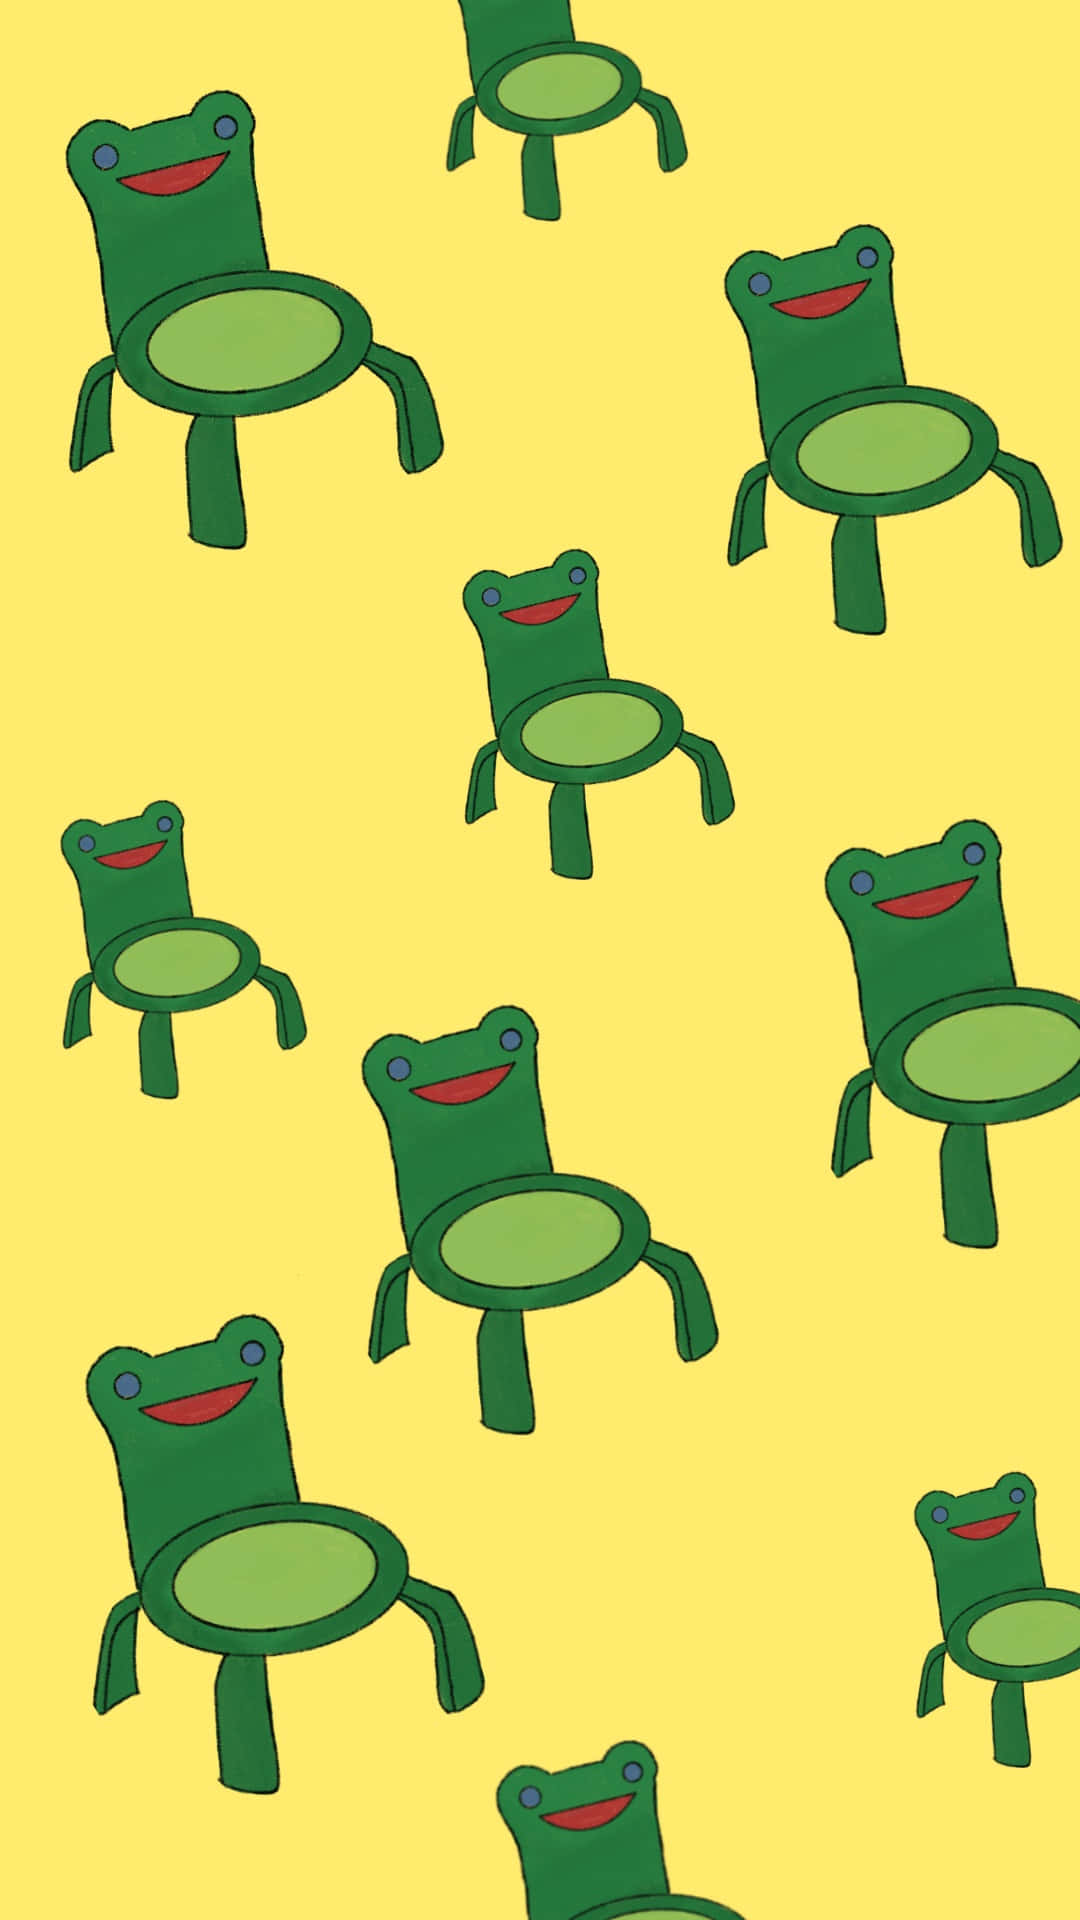 Smiling Froggy Chairs Pattern.jpg Wallpaper